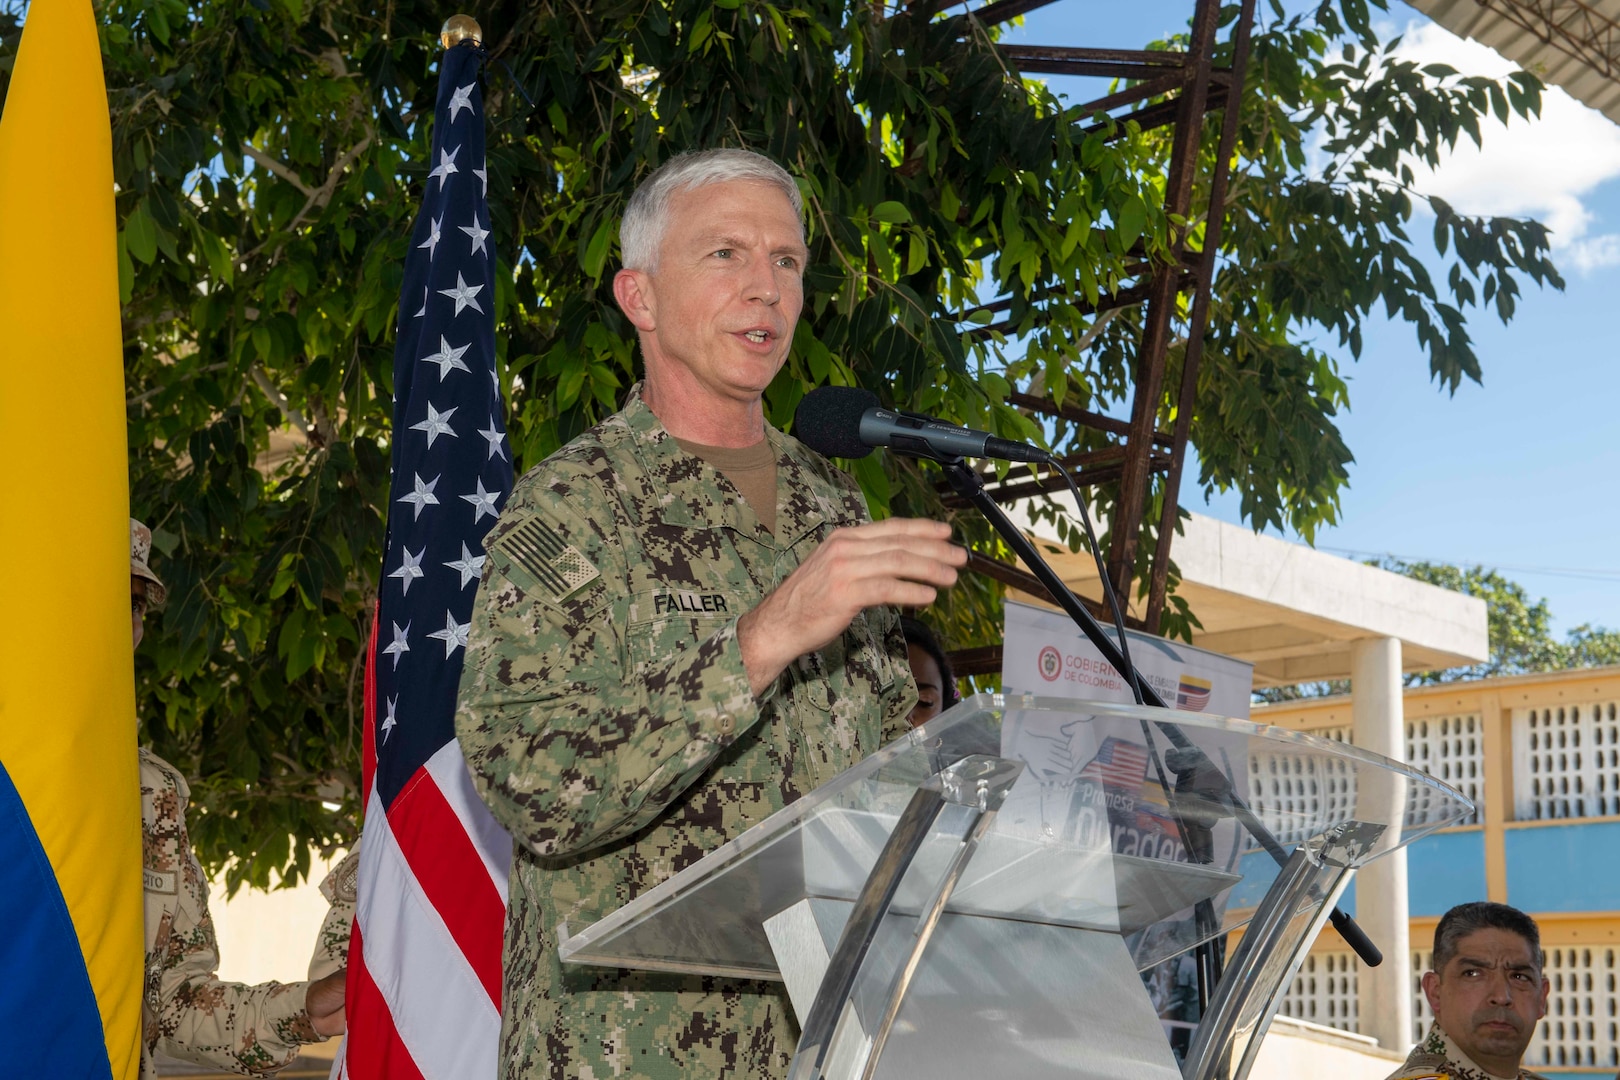 Adm. Craig Faller, commander, U.S. Southern Command, delivers remarks during the closing ceremony at a land-based medical site.